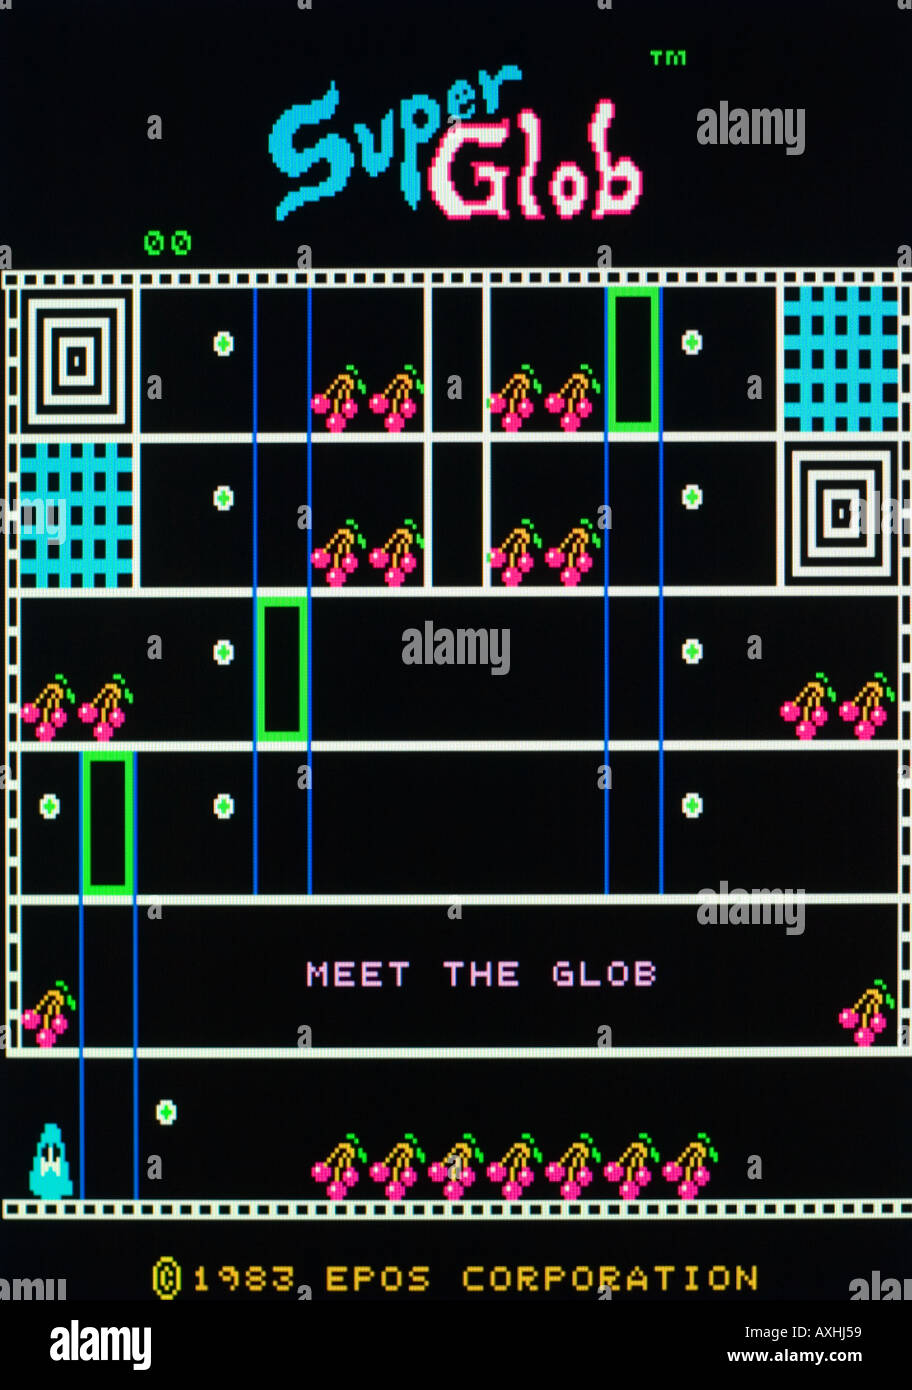 Super Glob Epos Corporation 1983 Vintage arcade videogame screen shot - EDITORIAL USE ONLY Stock Photo